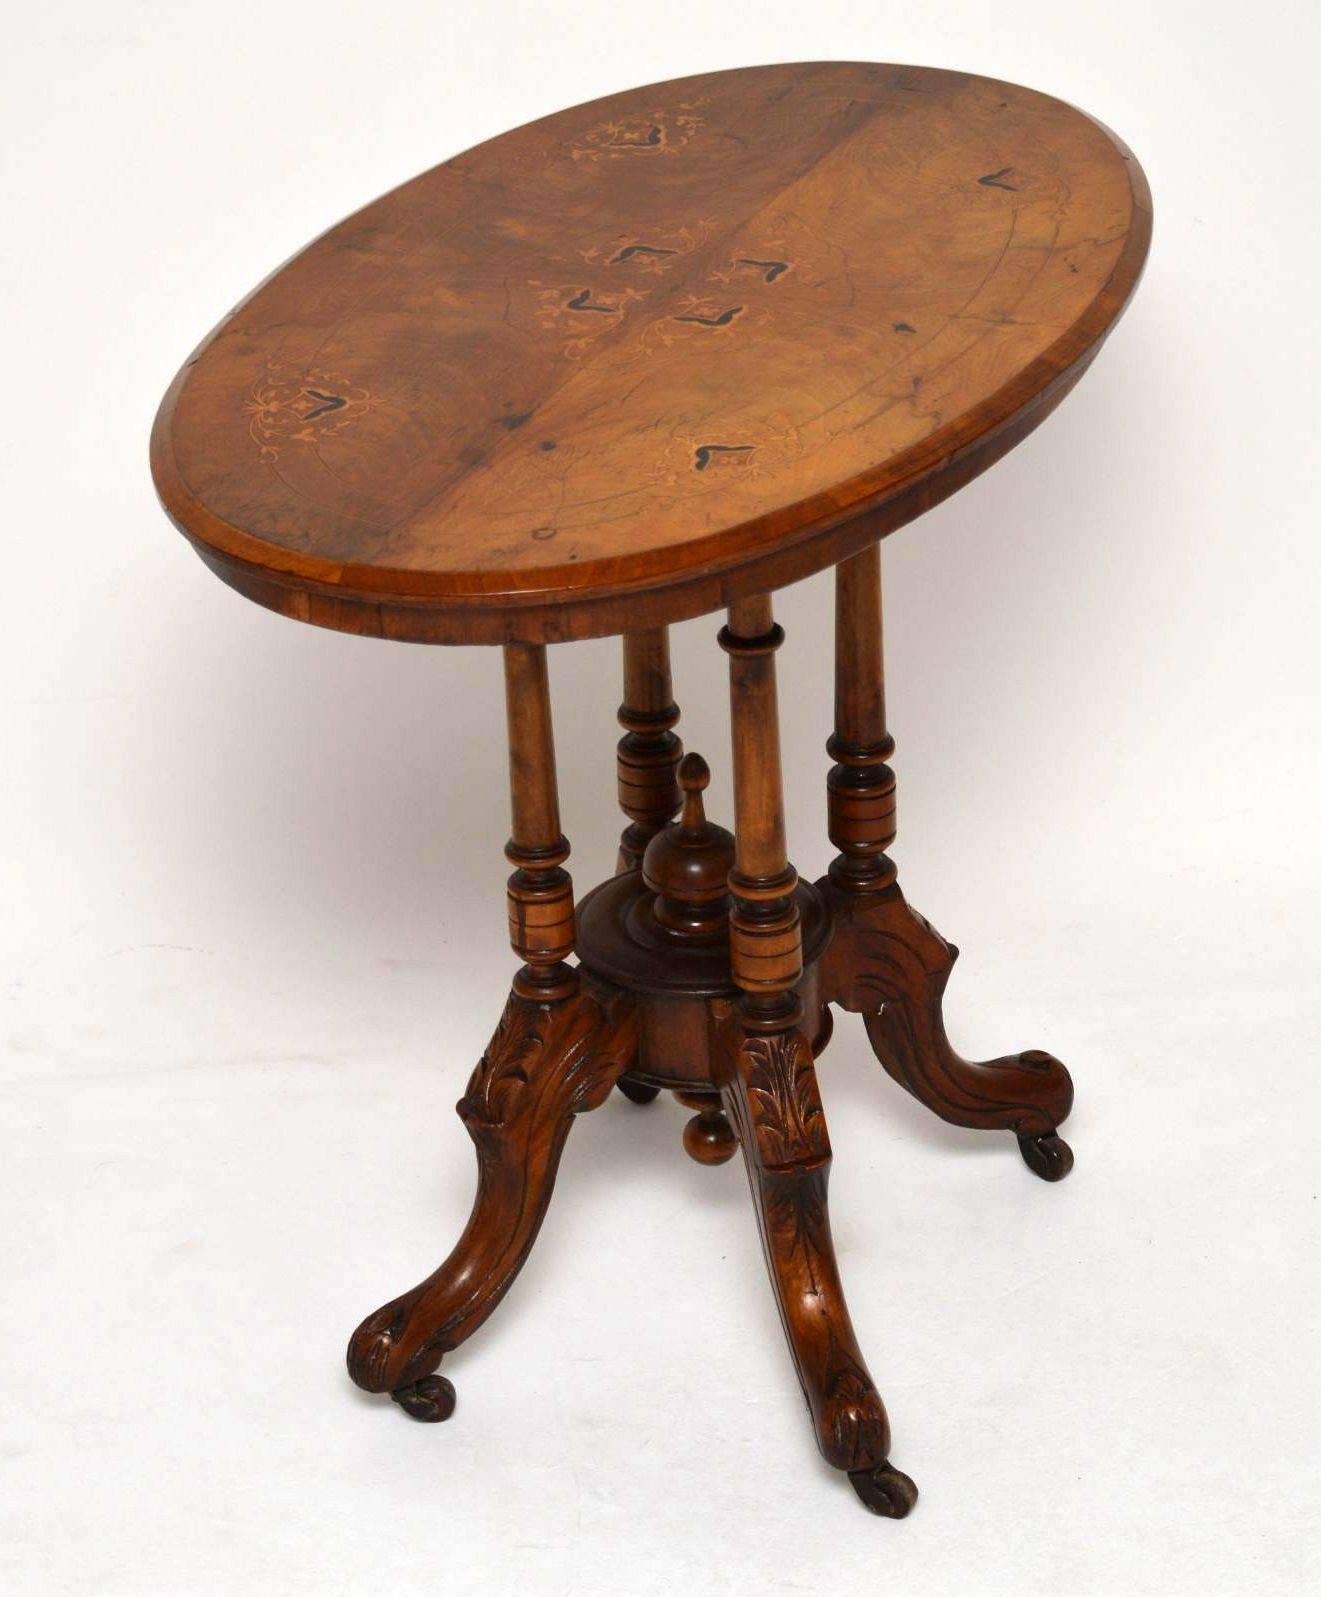 Antique Victorian walnut occasional table with an intricately inlaid top sitting on four turned supports that in turn sit on a carved quadruple legged base. This table is full of character and has a good warm color, plus it's in good condition. It